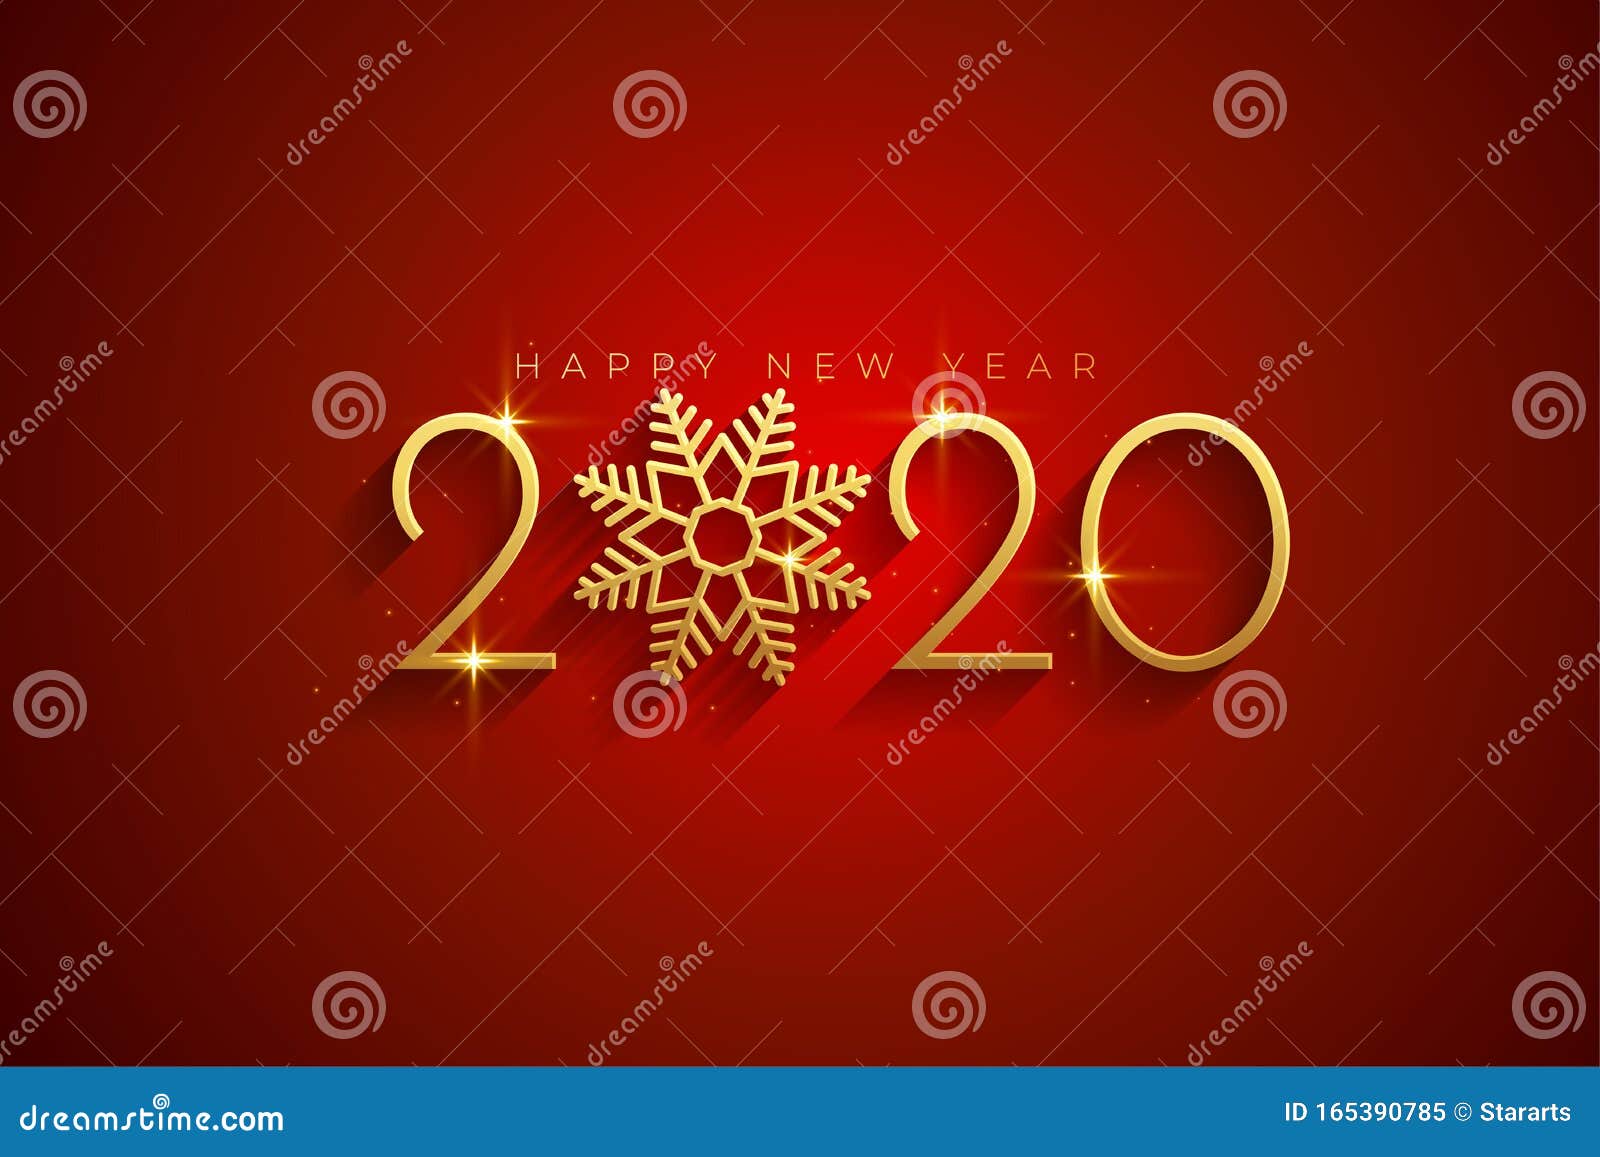 elegant-red-and-gold-happy-new-year-2020-background-card-stock-vector